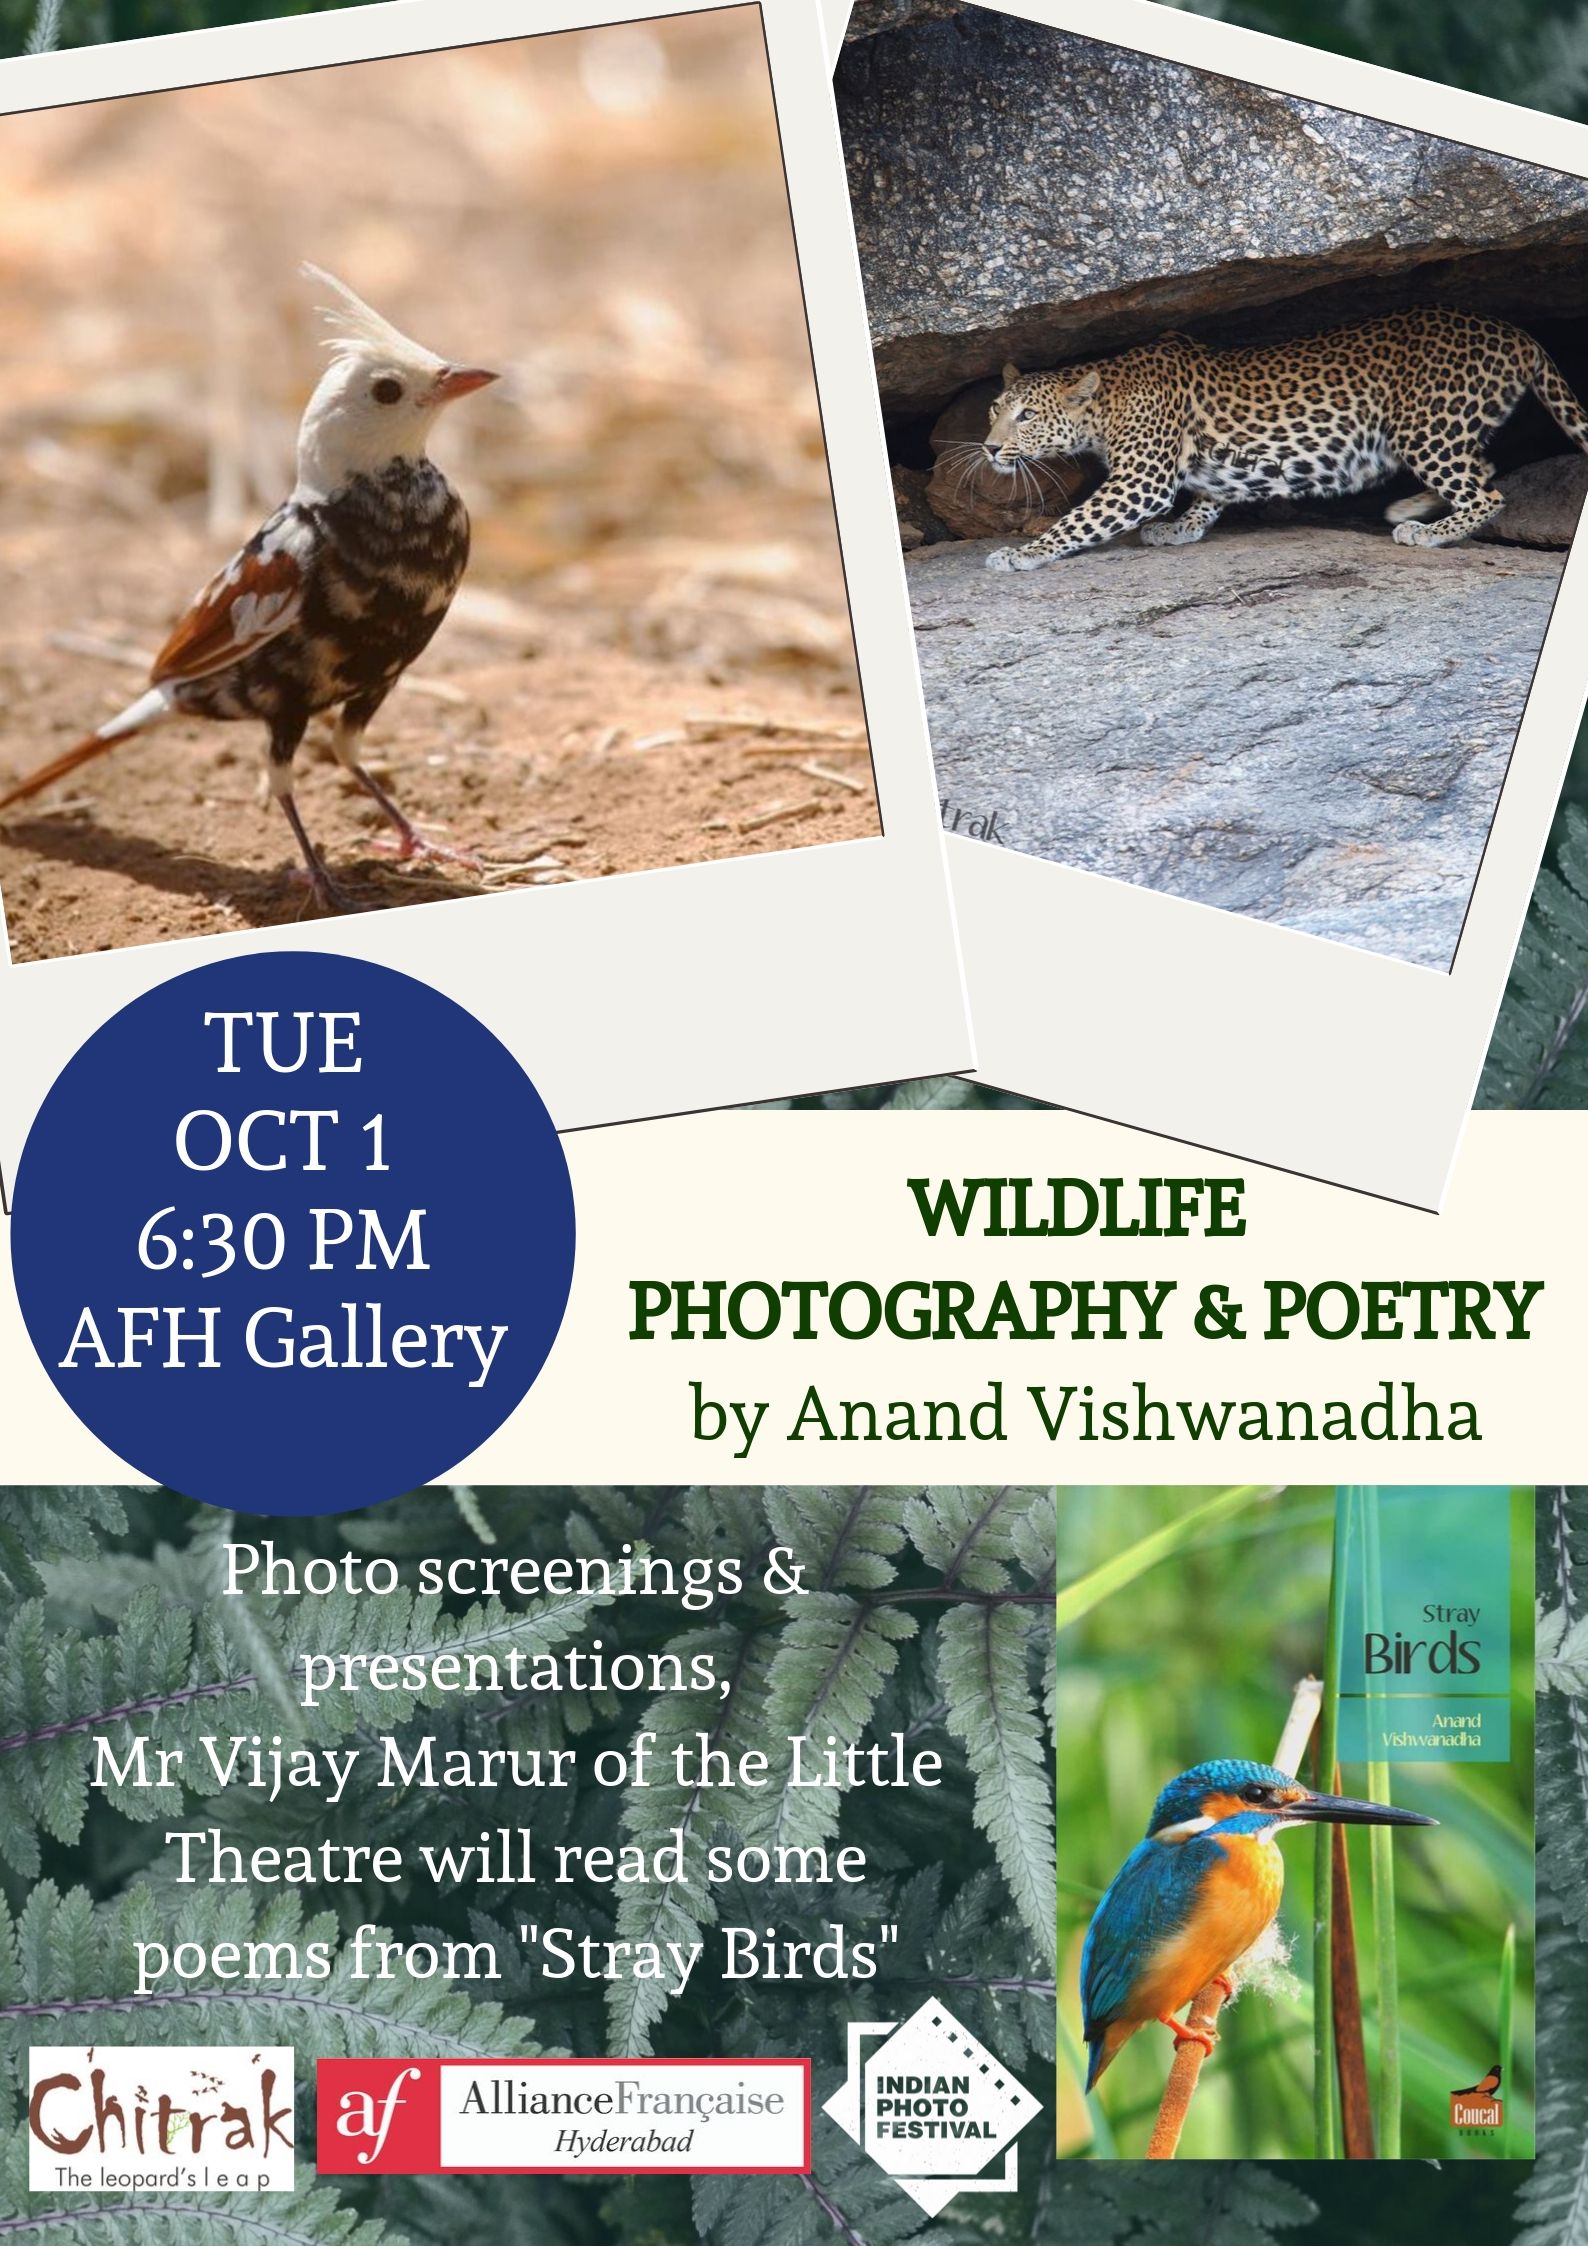 Photography & Poetry evening by Anand Vishwanadha  -  OCT 1 at 6.30pm